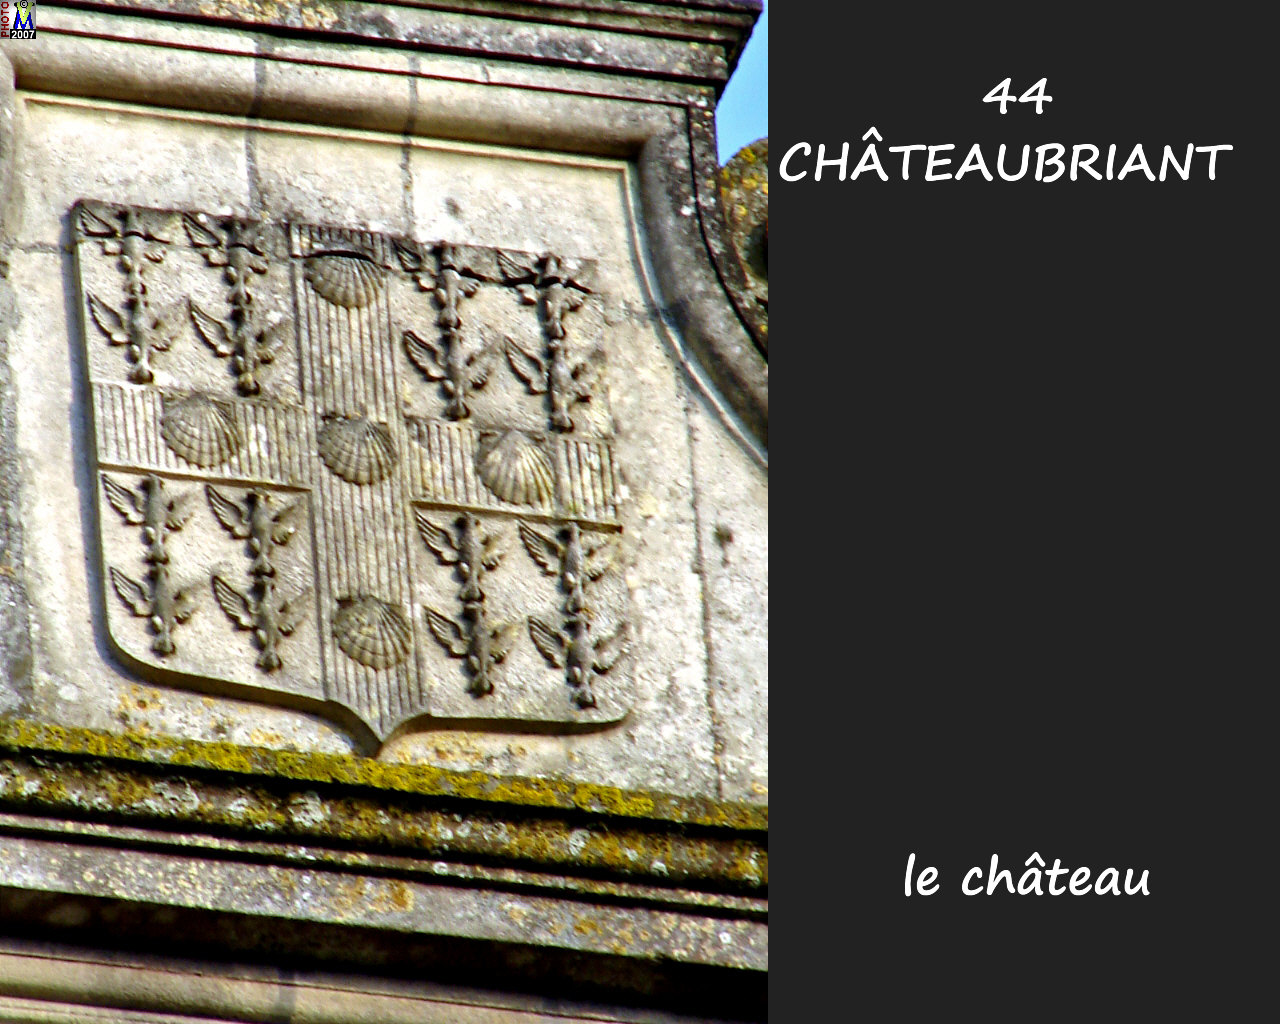 44CHATEAUBRIANT_chateau_232.jpg